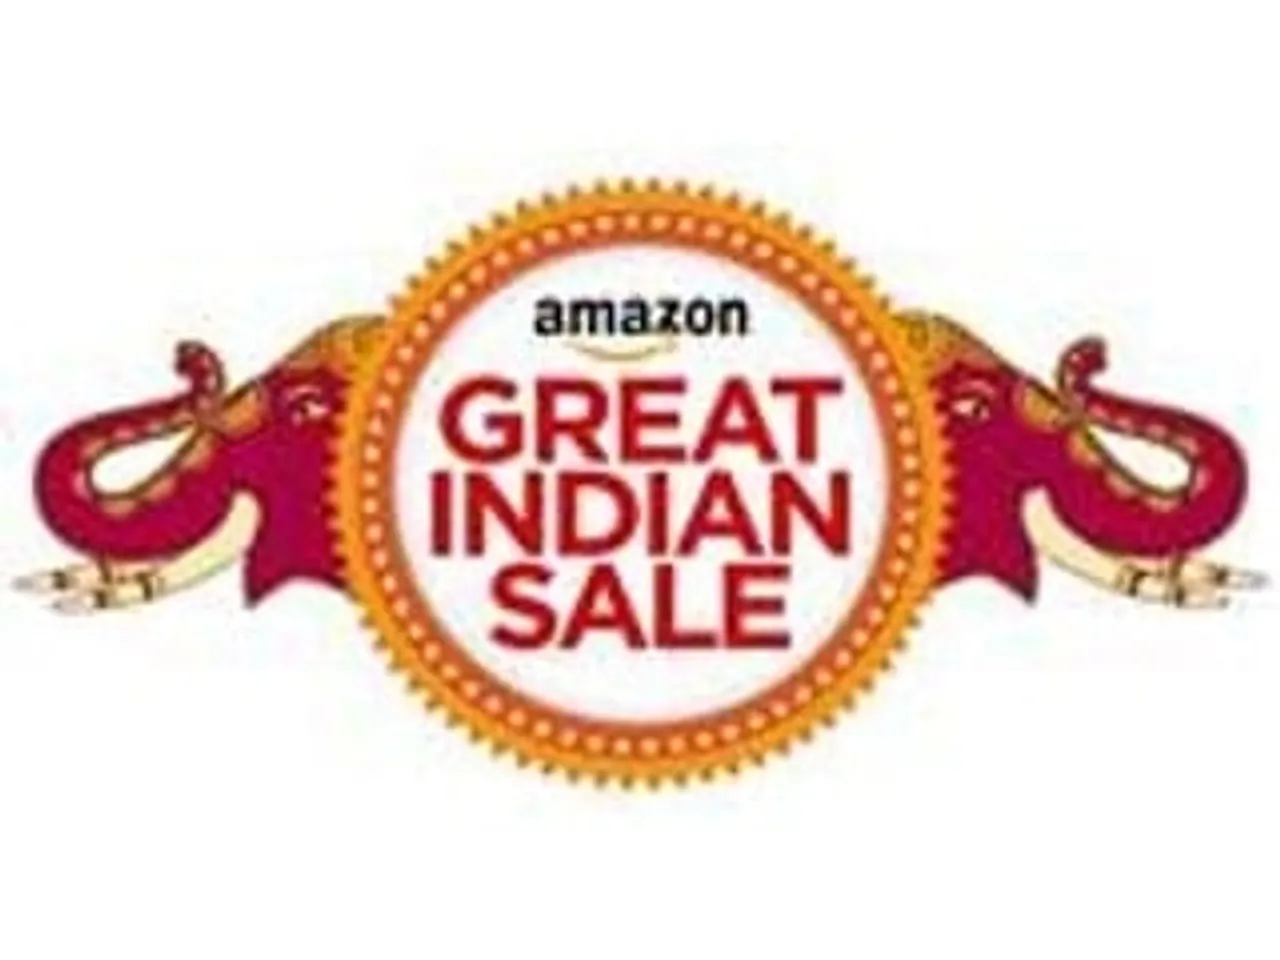 Great Indian sale on Amazon.in starts today